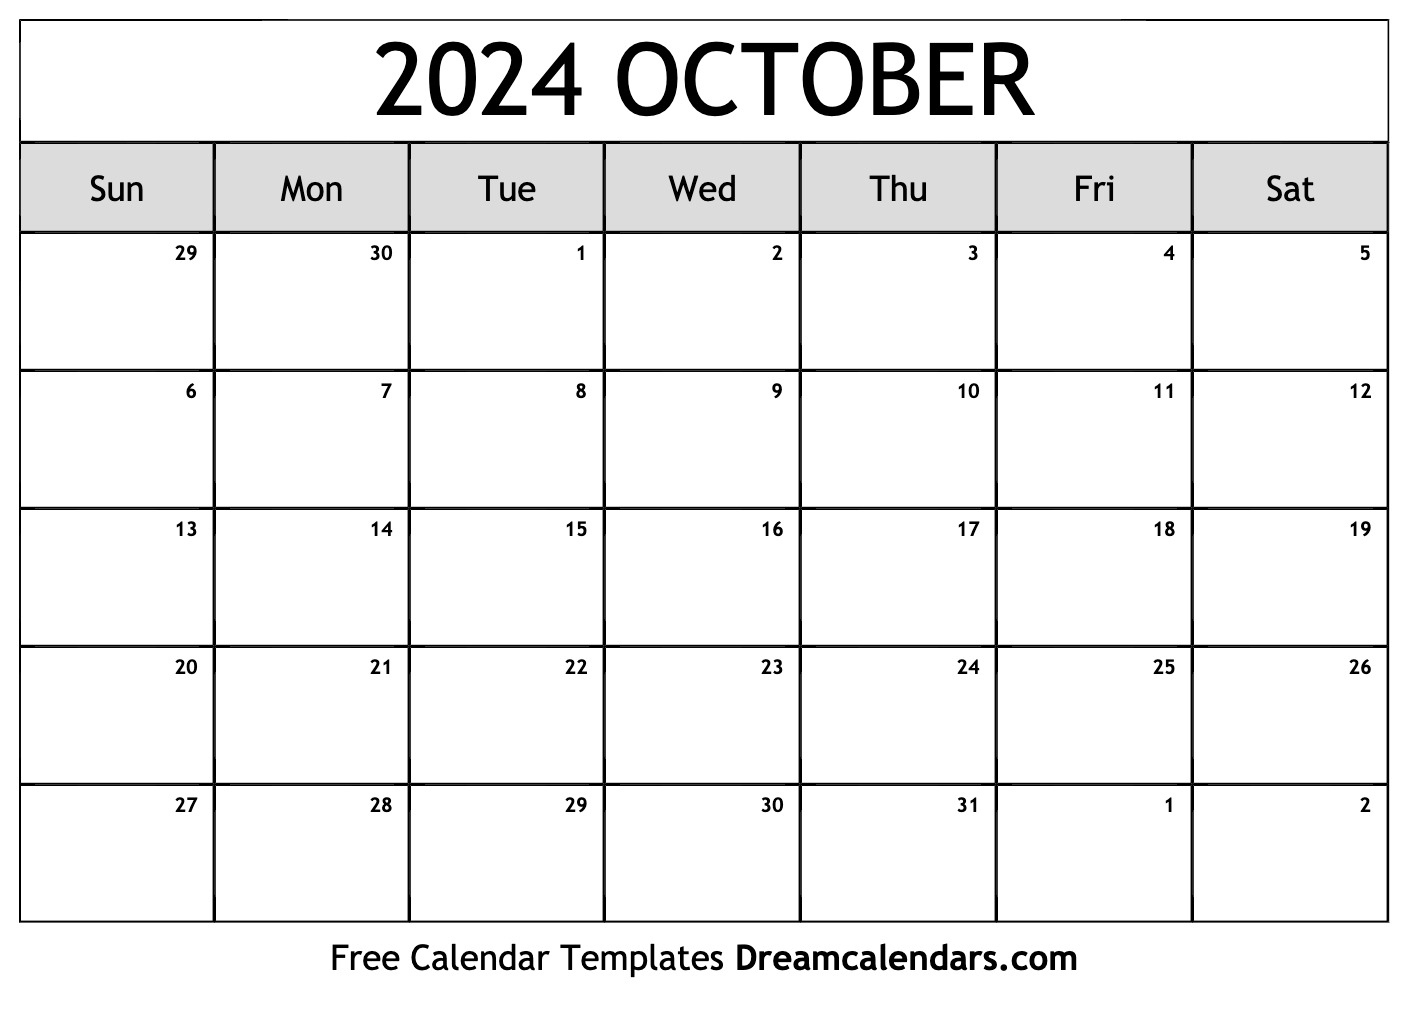 October 2024 Calendar | Free Blank Printable With Holidays | October Printable Calendar 2024